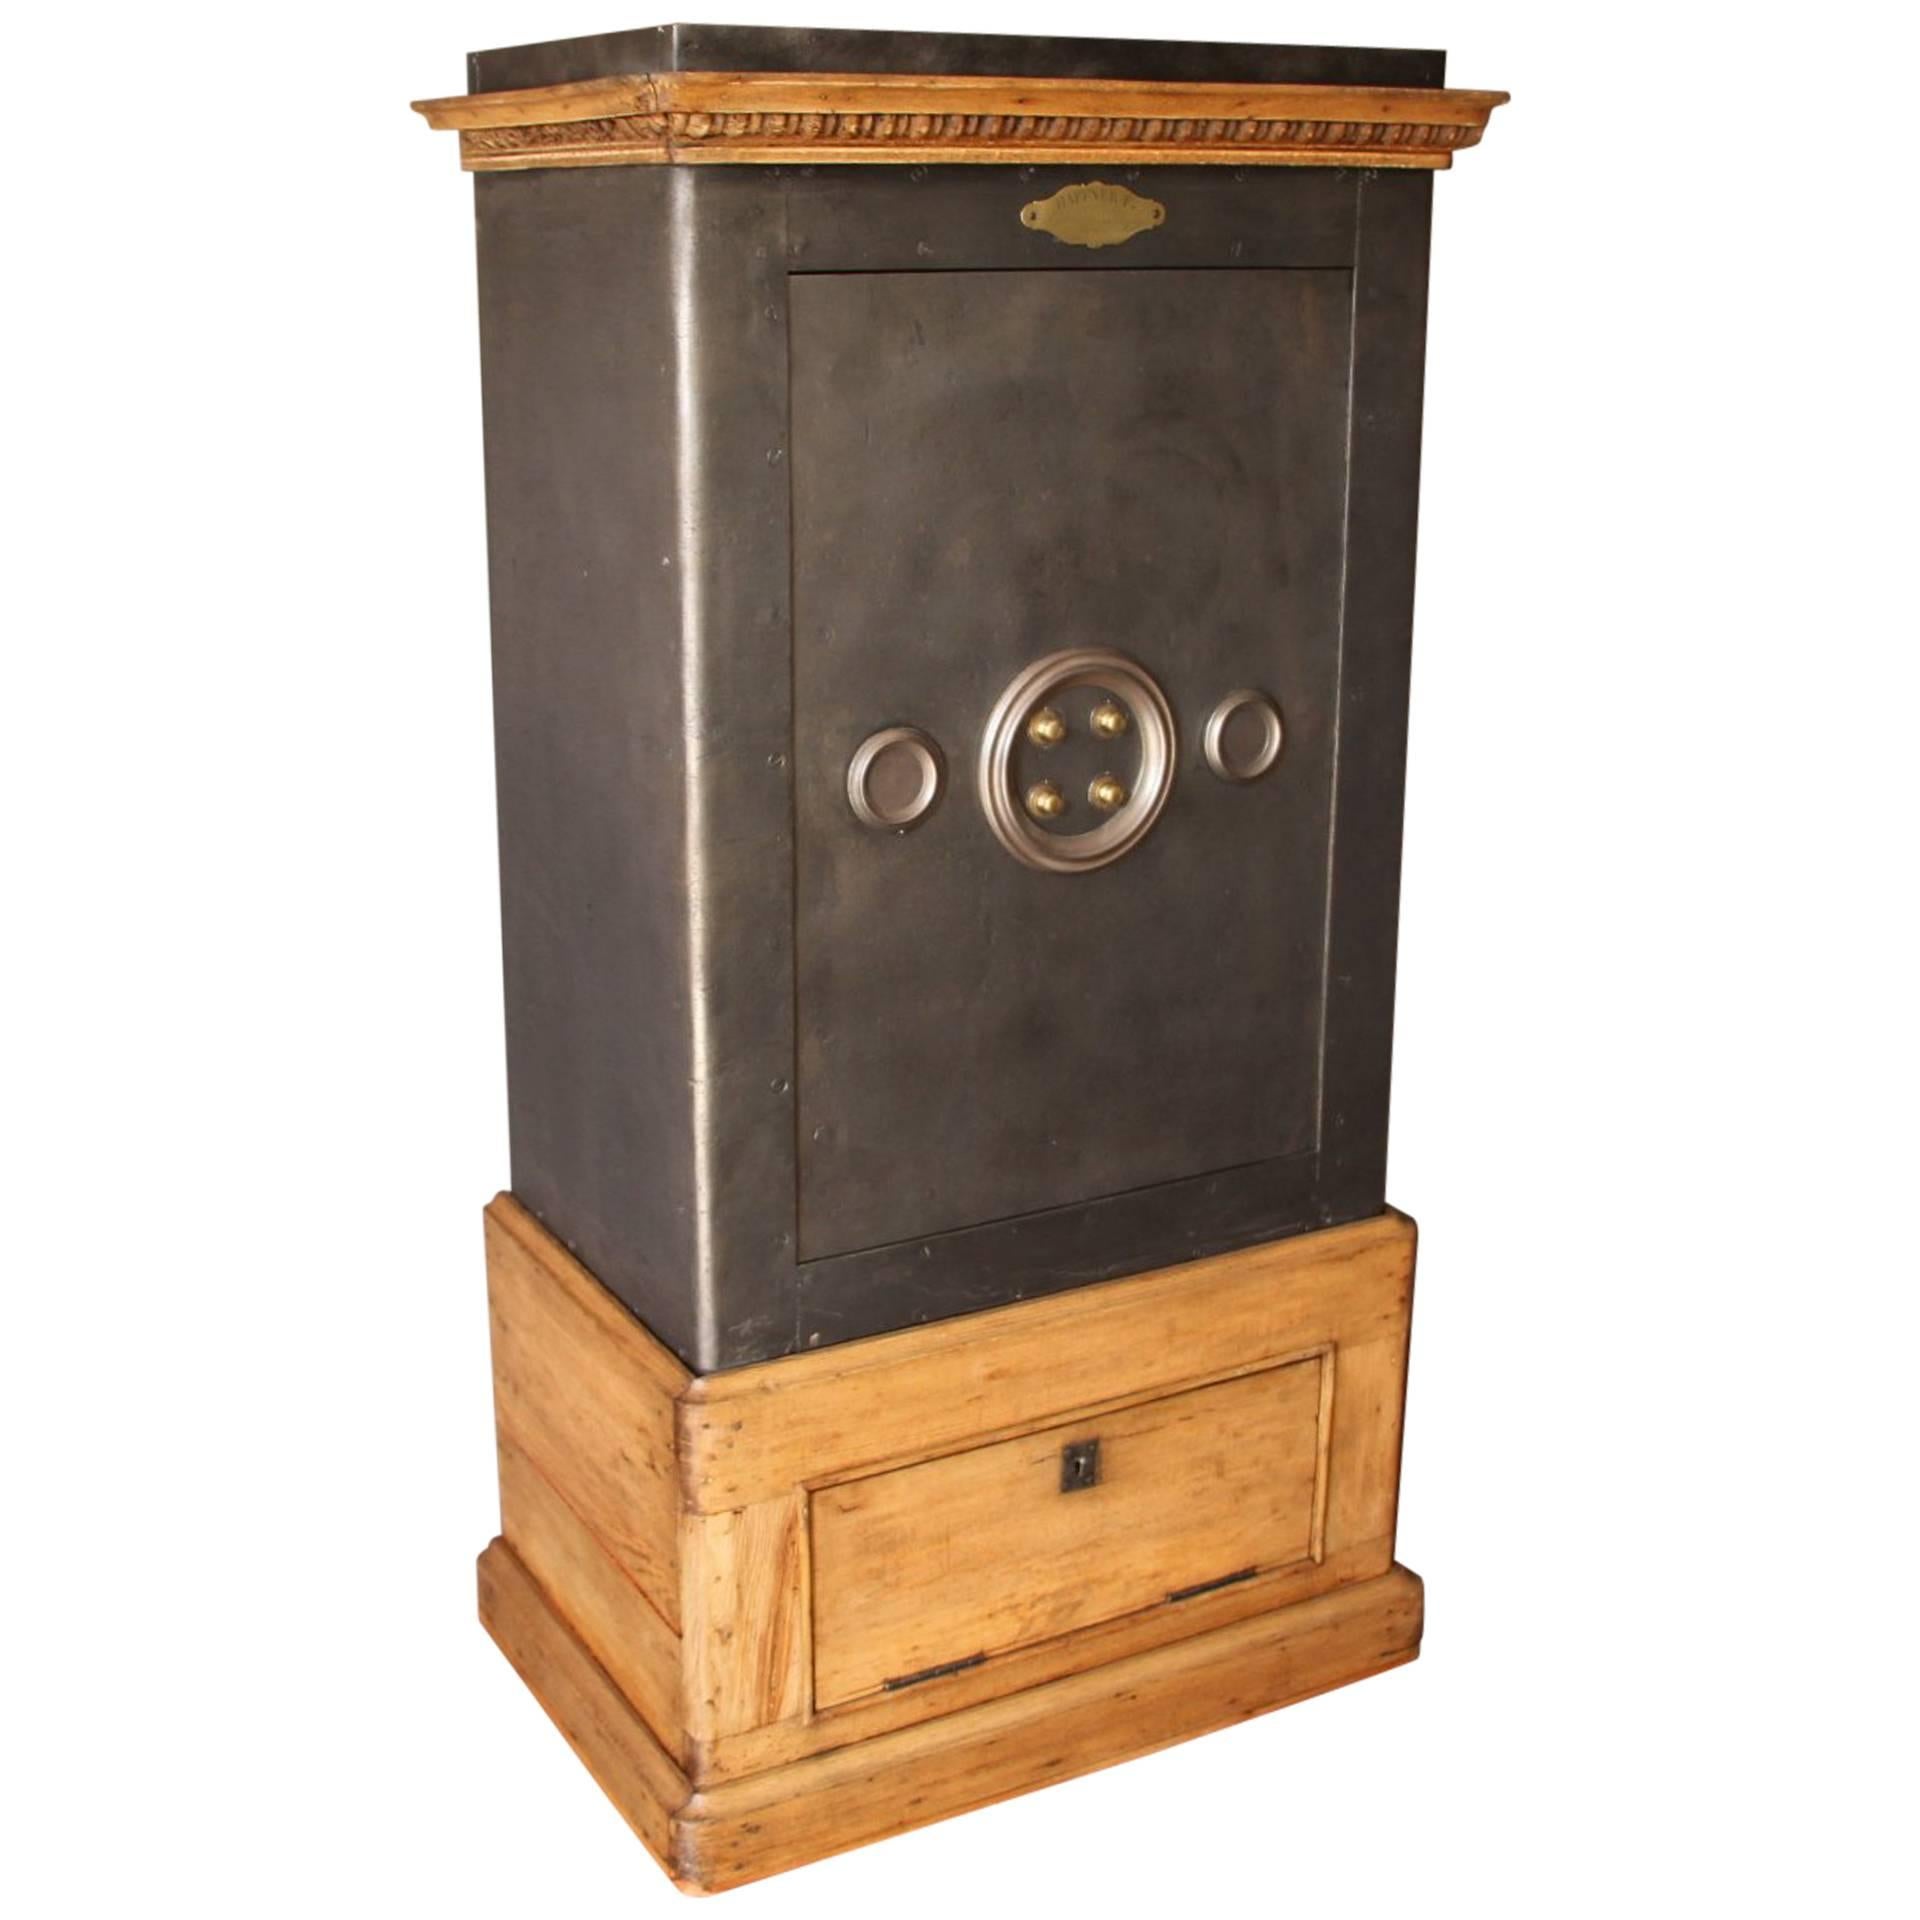 Large Black Steel, Iron and Wood Safe with Keys and Working Combination